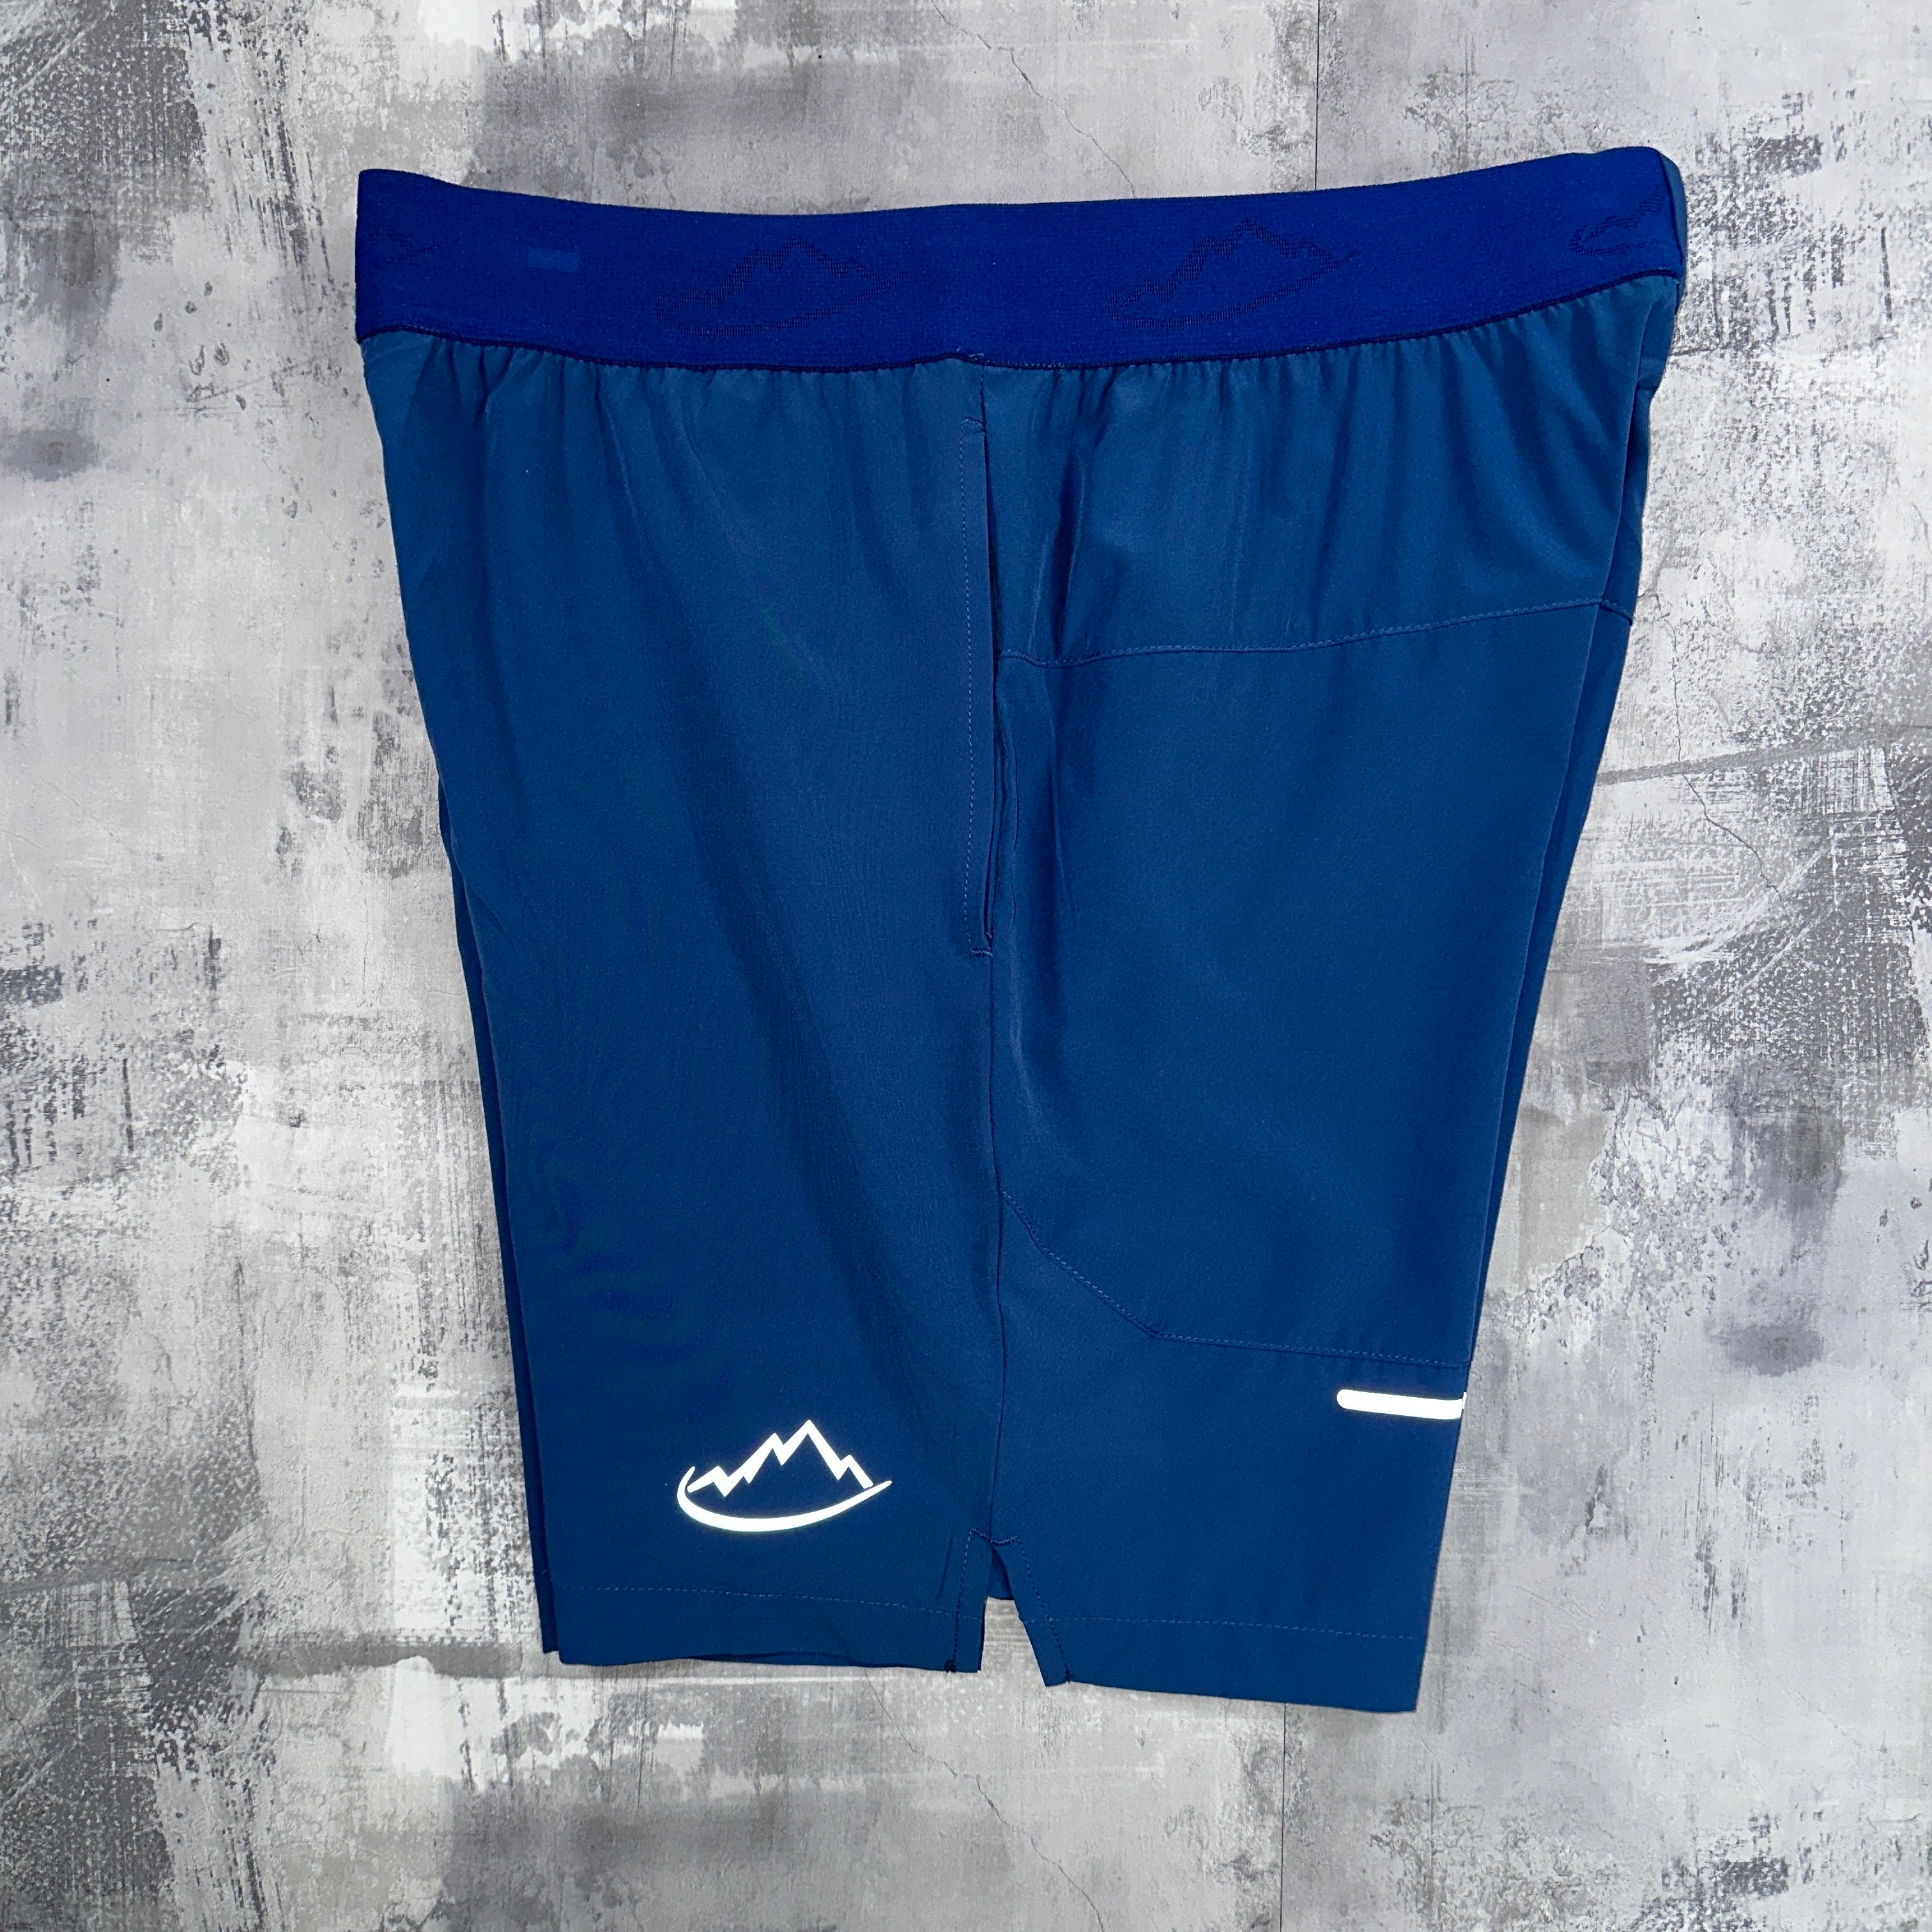 Adapt To Performance shorts Blue